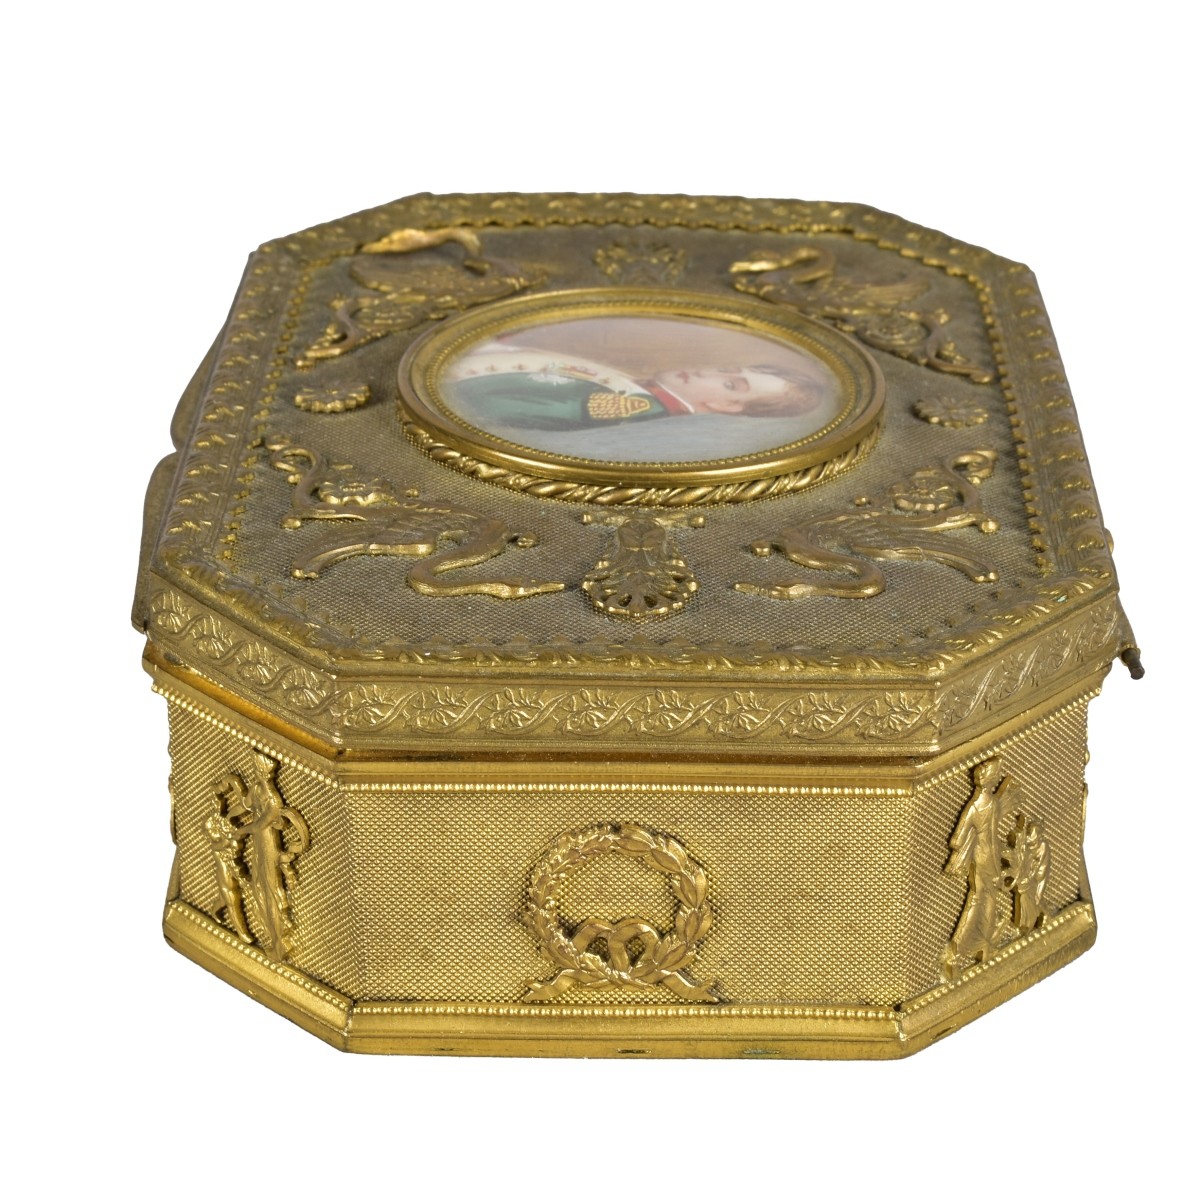 Antique French Empire Style Box